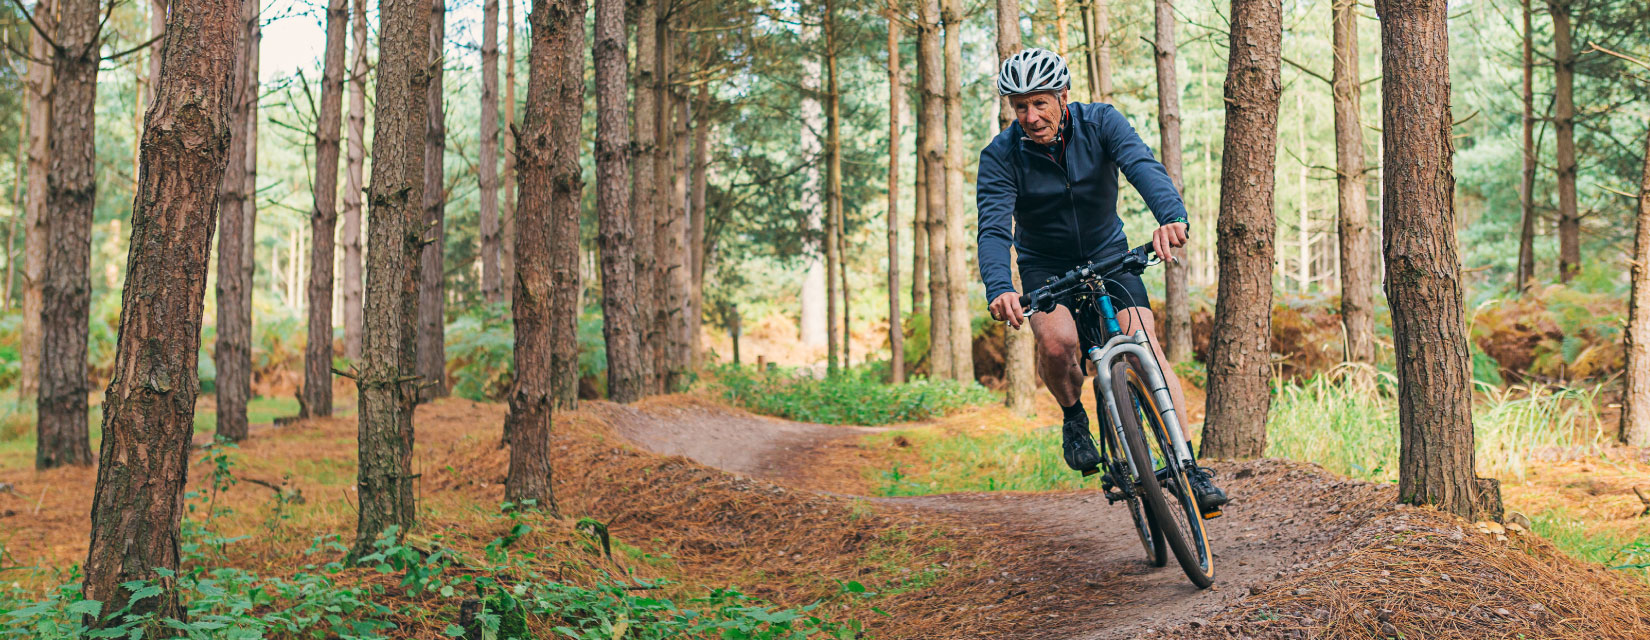 A man in his later years mountain biking through the woods